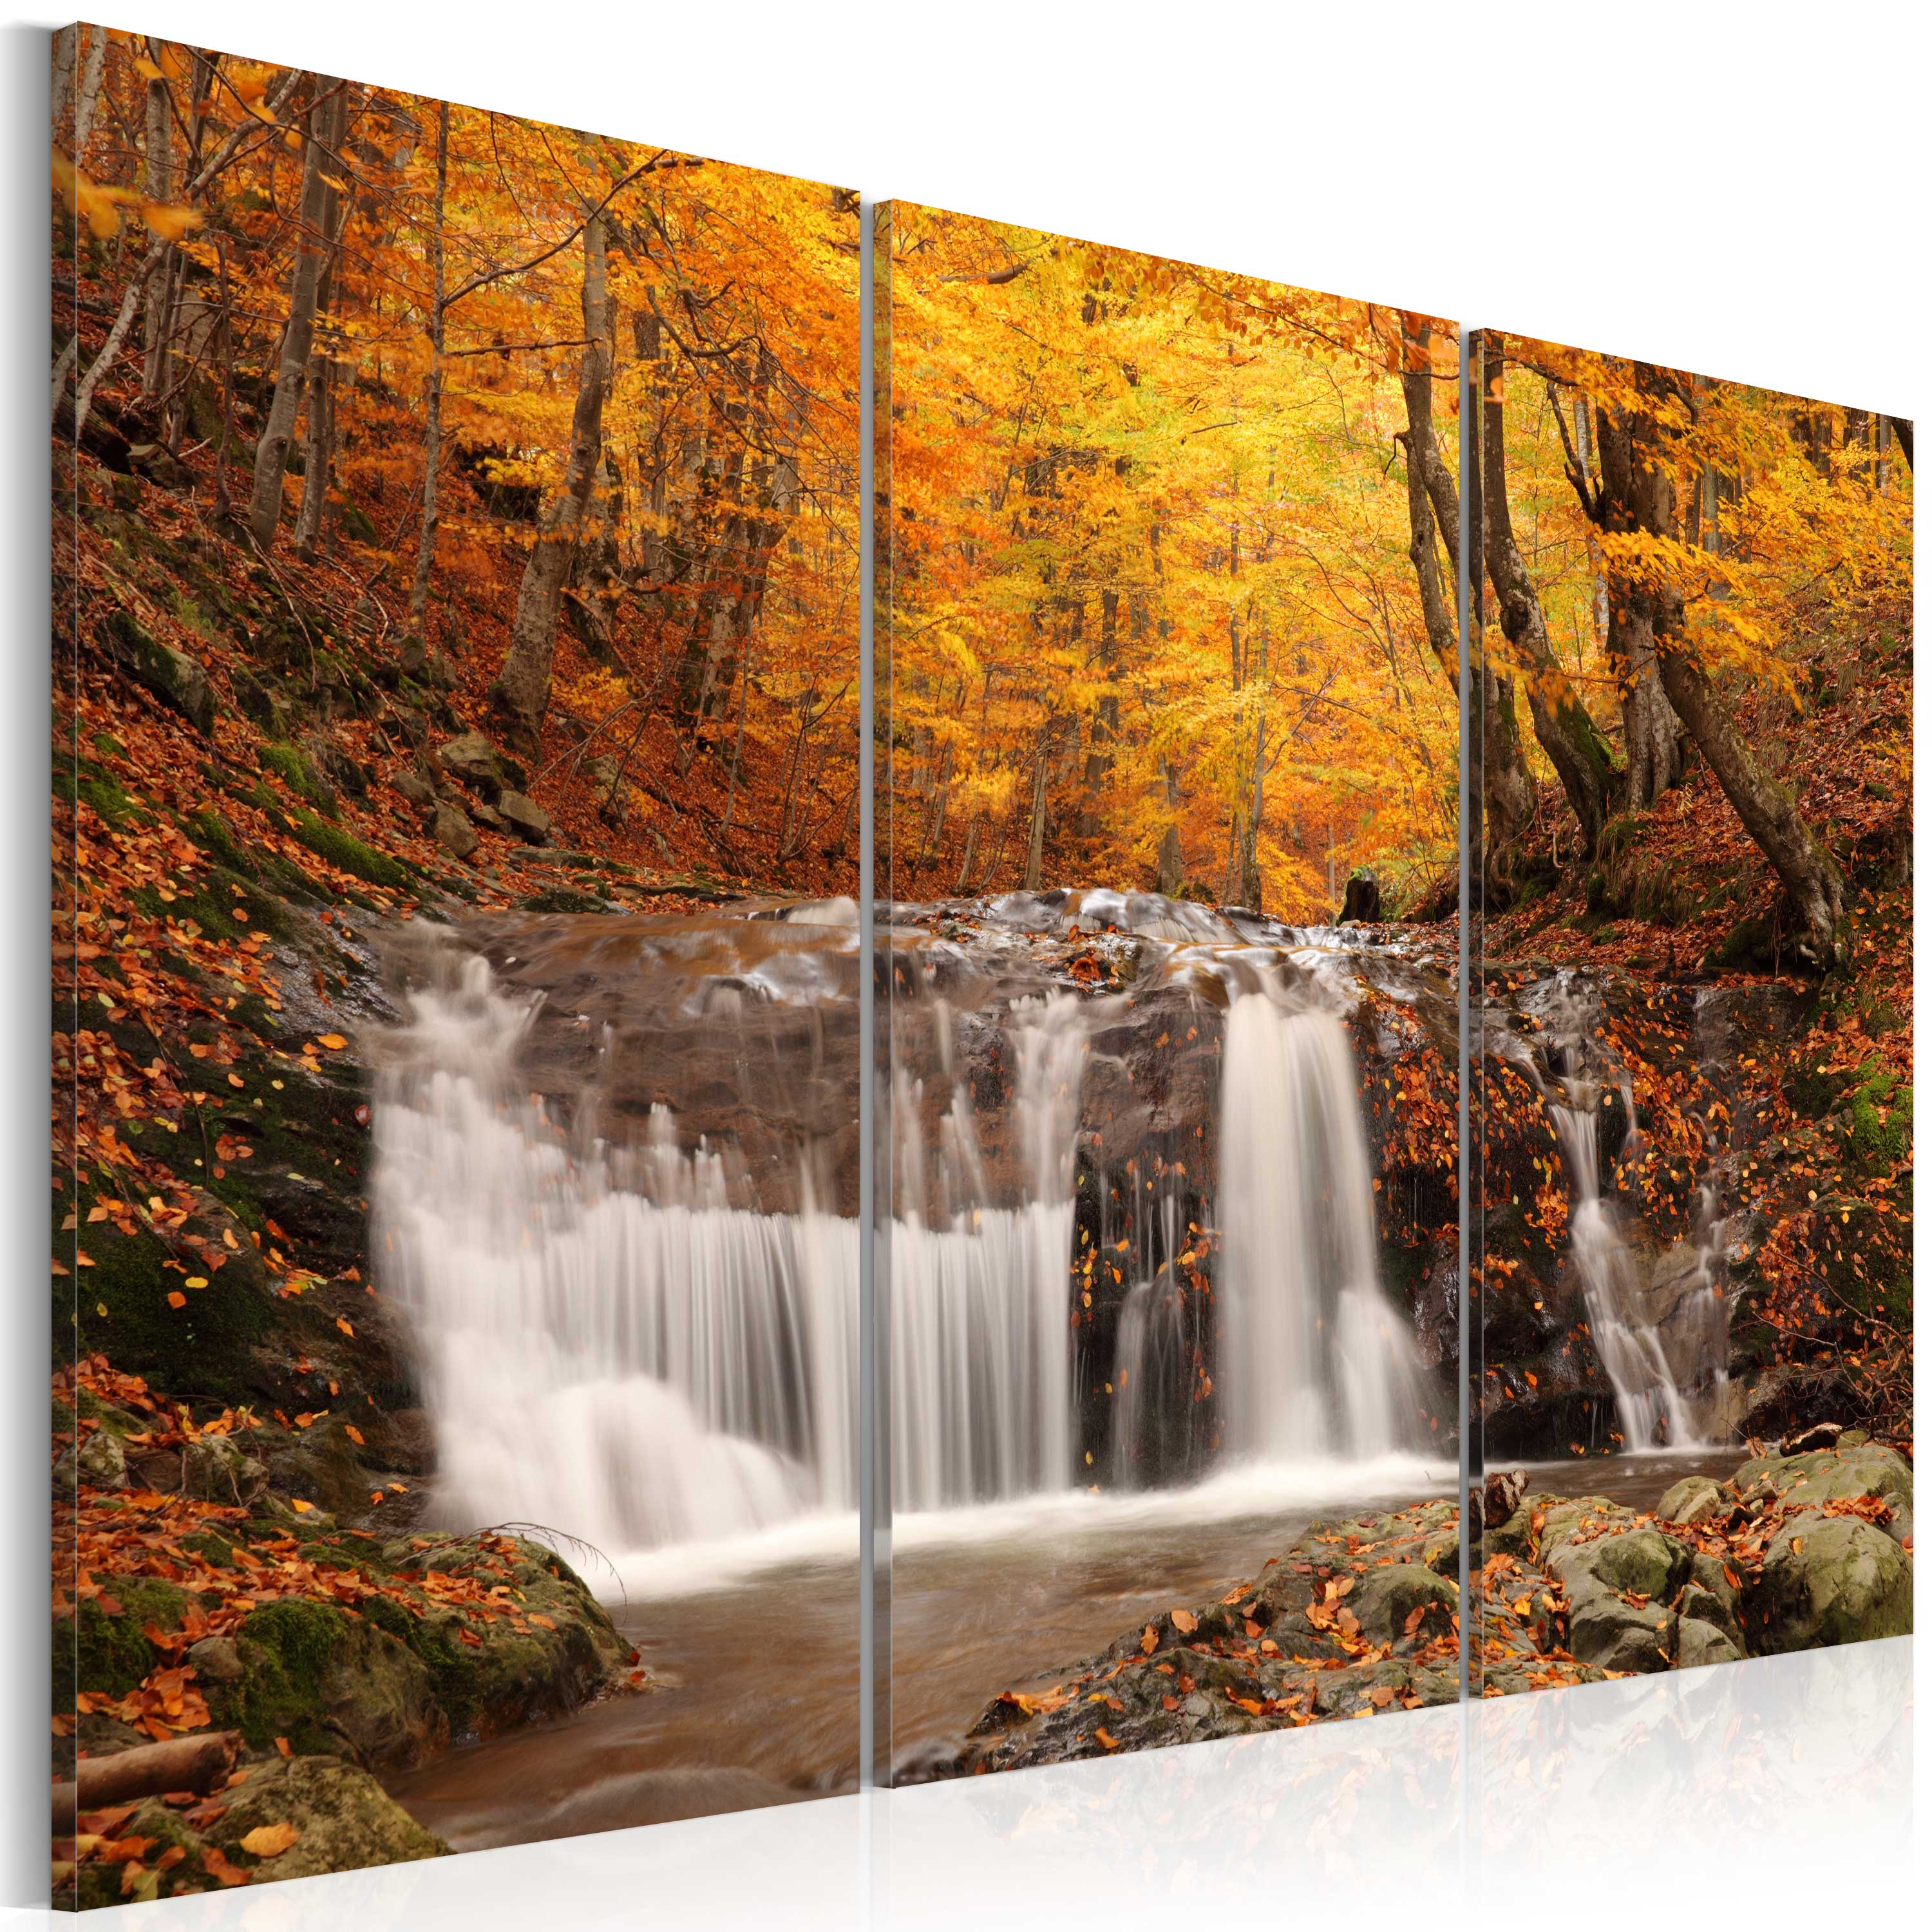 Canvas Print - A waterfall in the middle of fall trees - 60x40